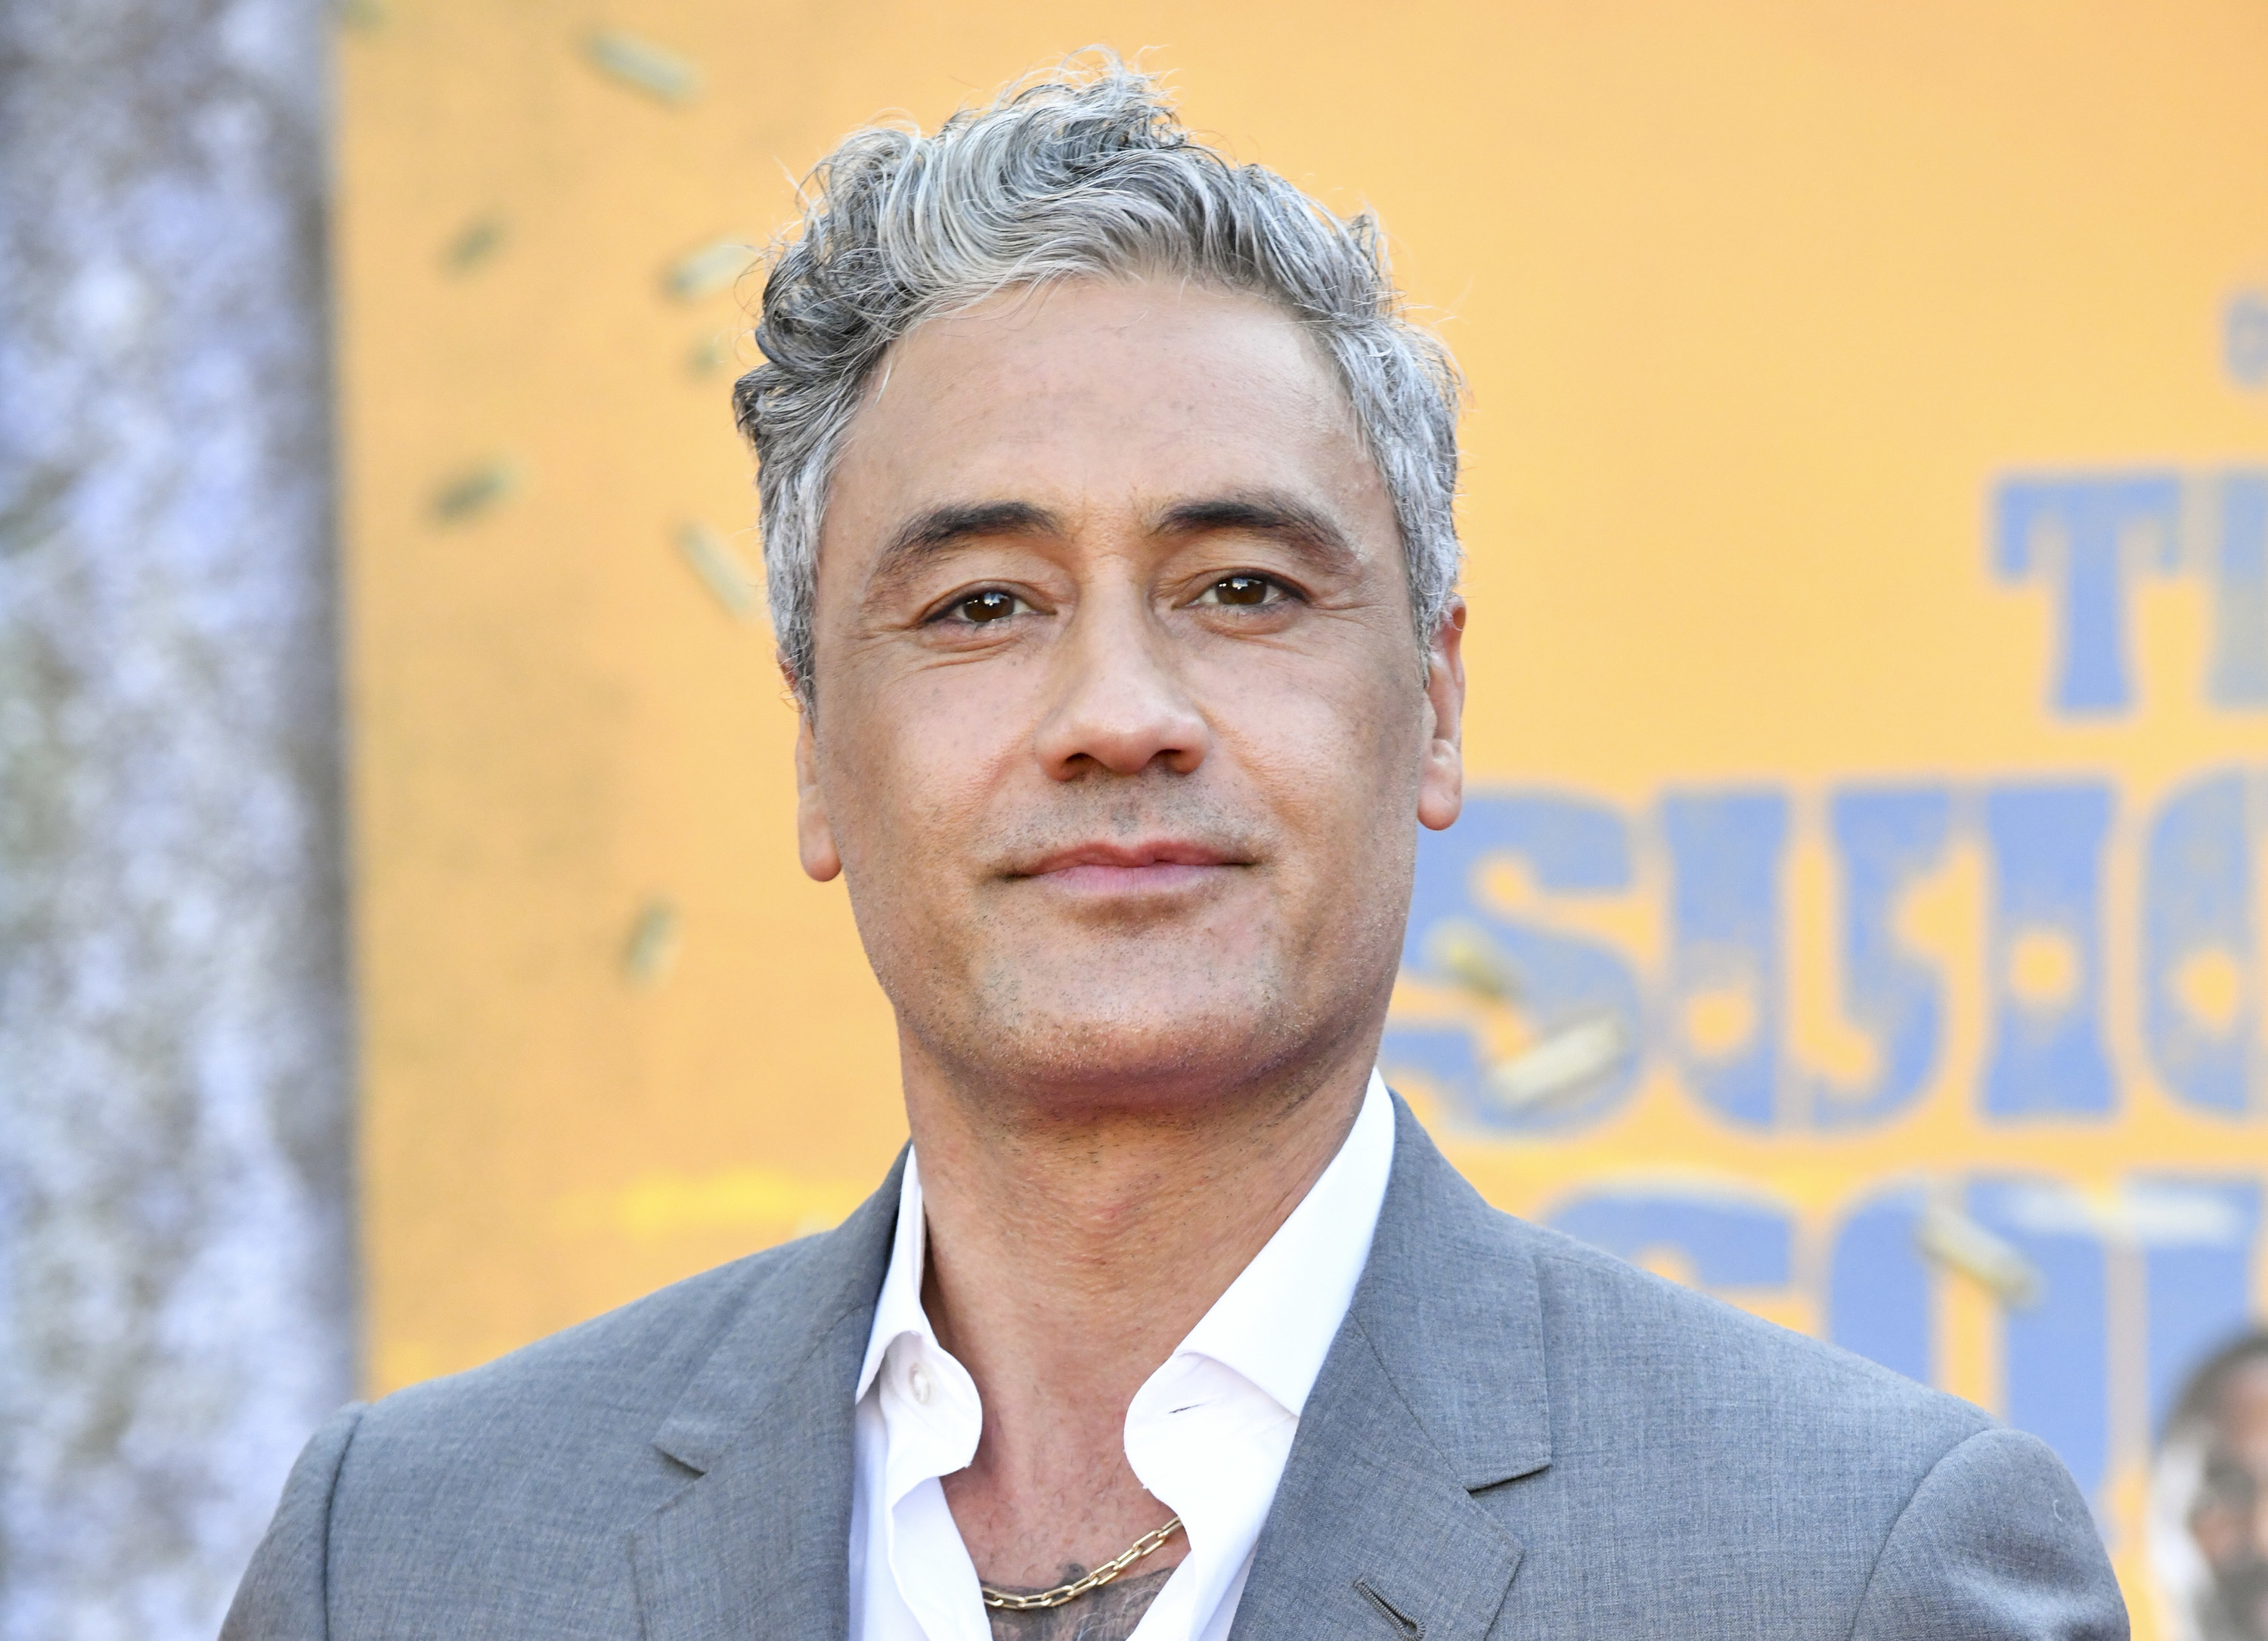 Taika smiling in a grey suit jacket with an open necked white shirt